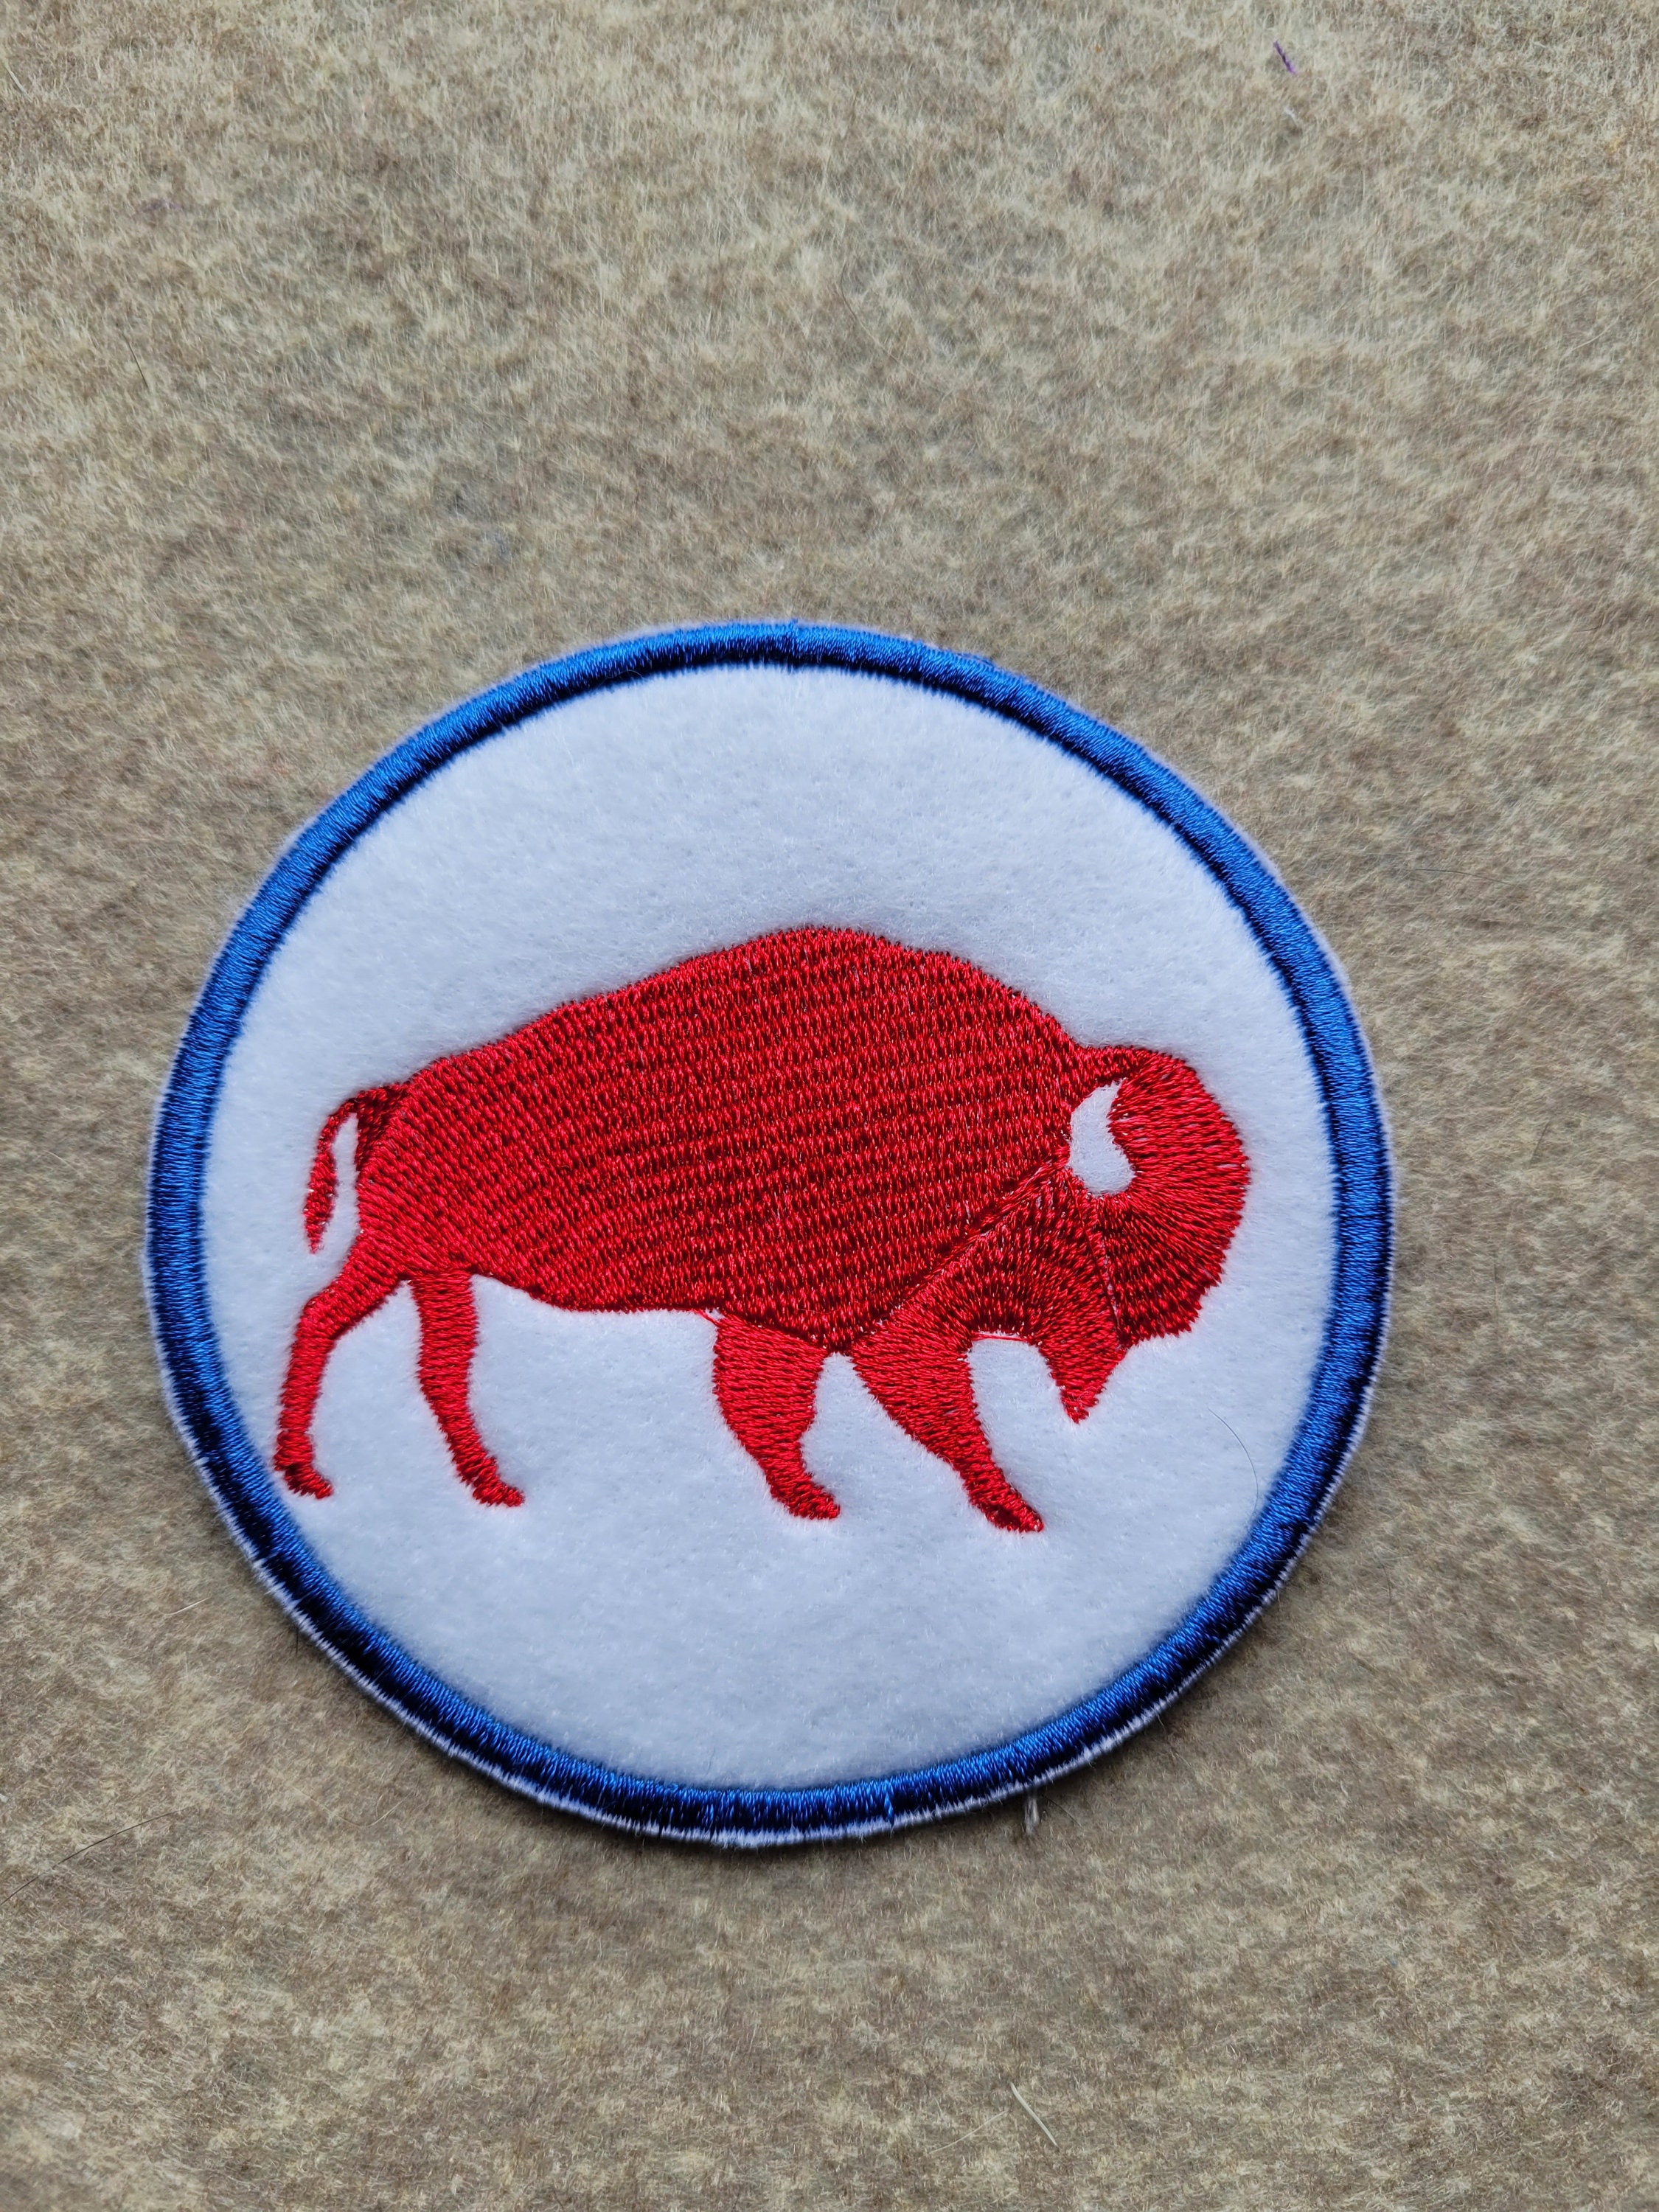 2) Buffalo Bills vintage embroidered iron on patches Patch Lot 3” X 2.5 ,  3”